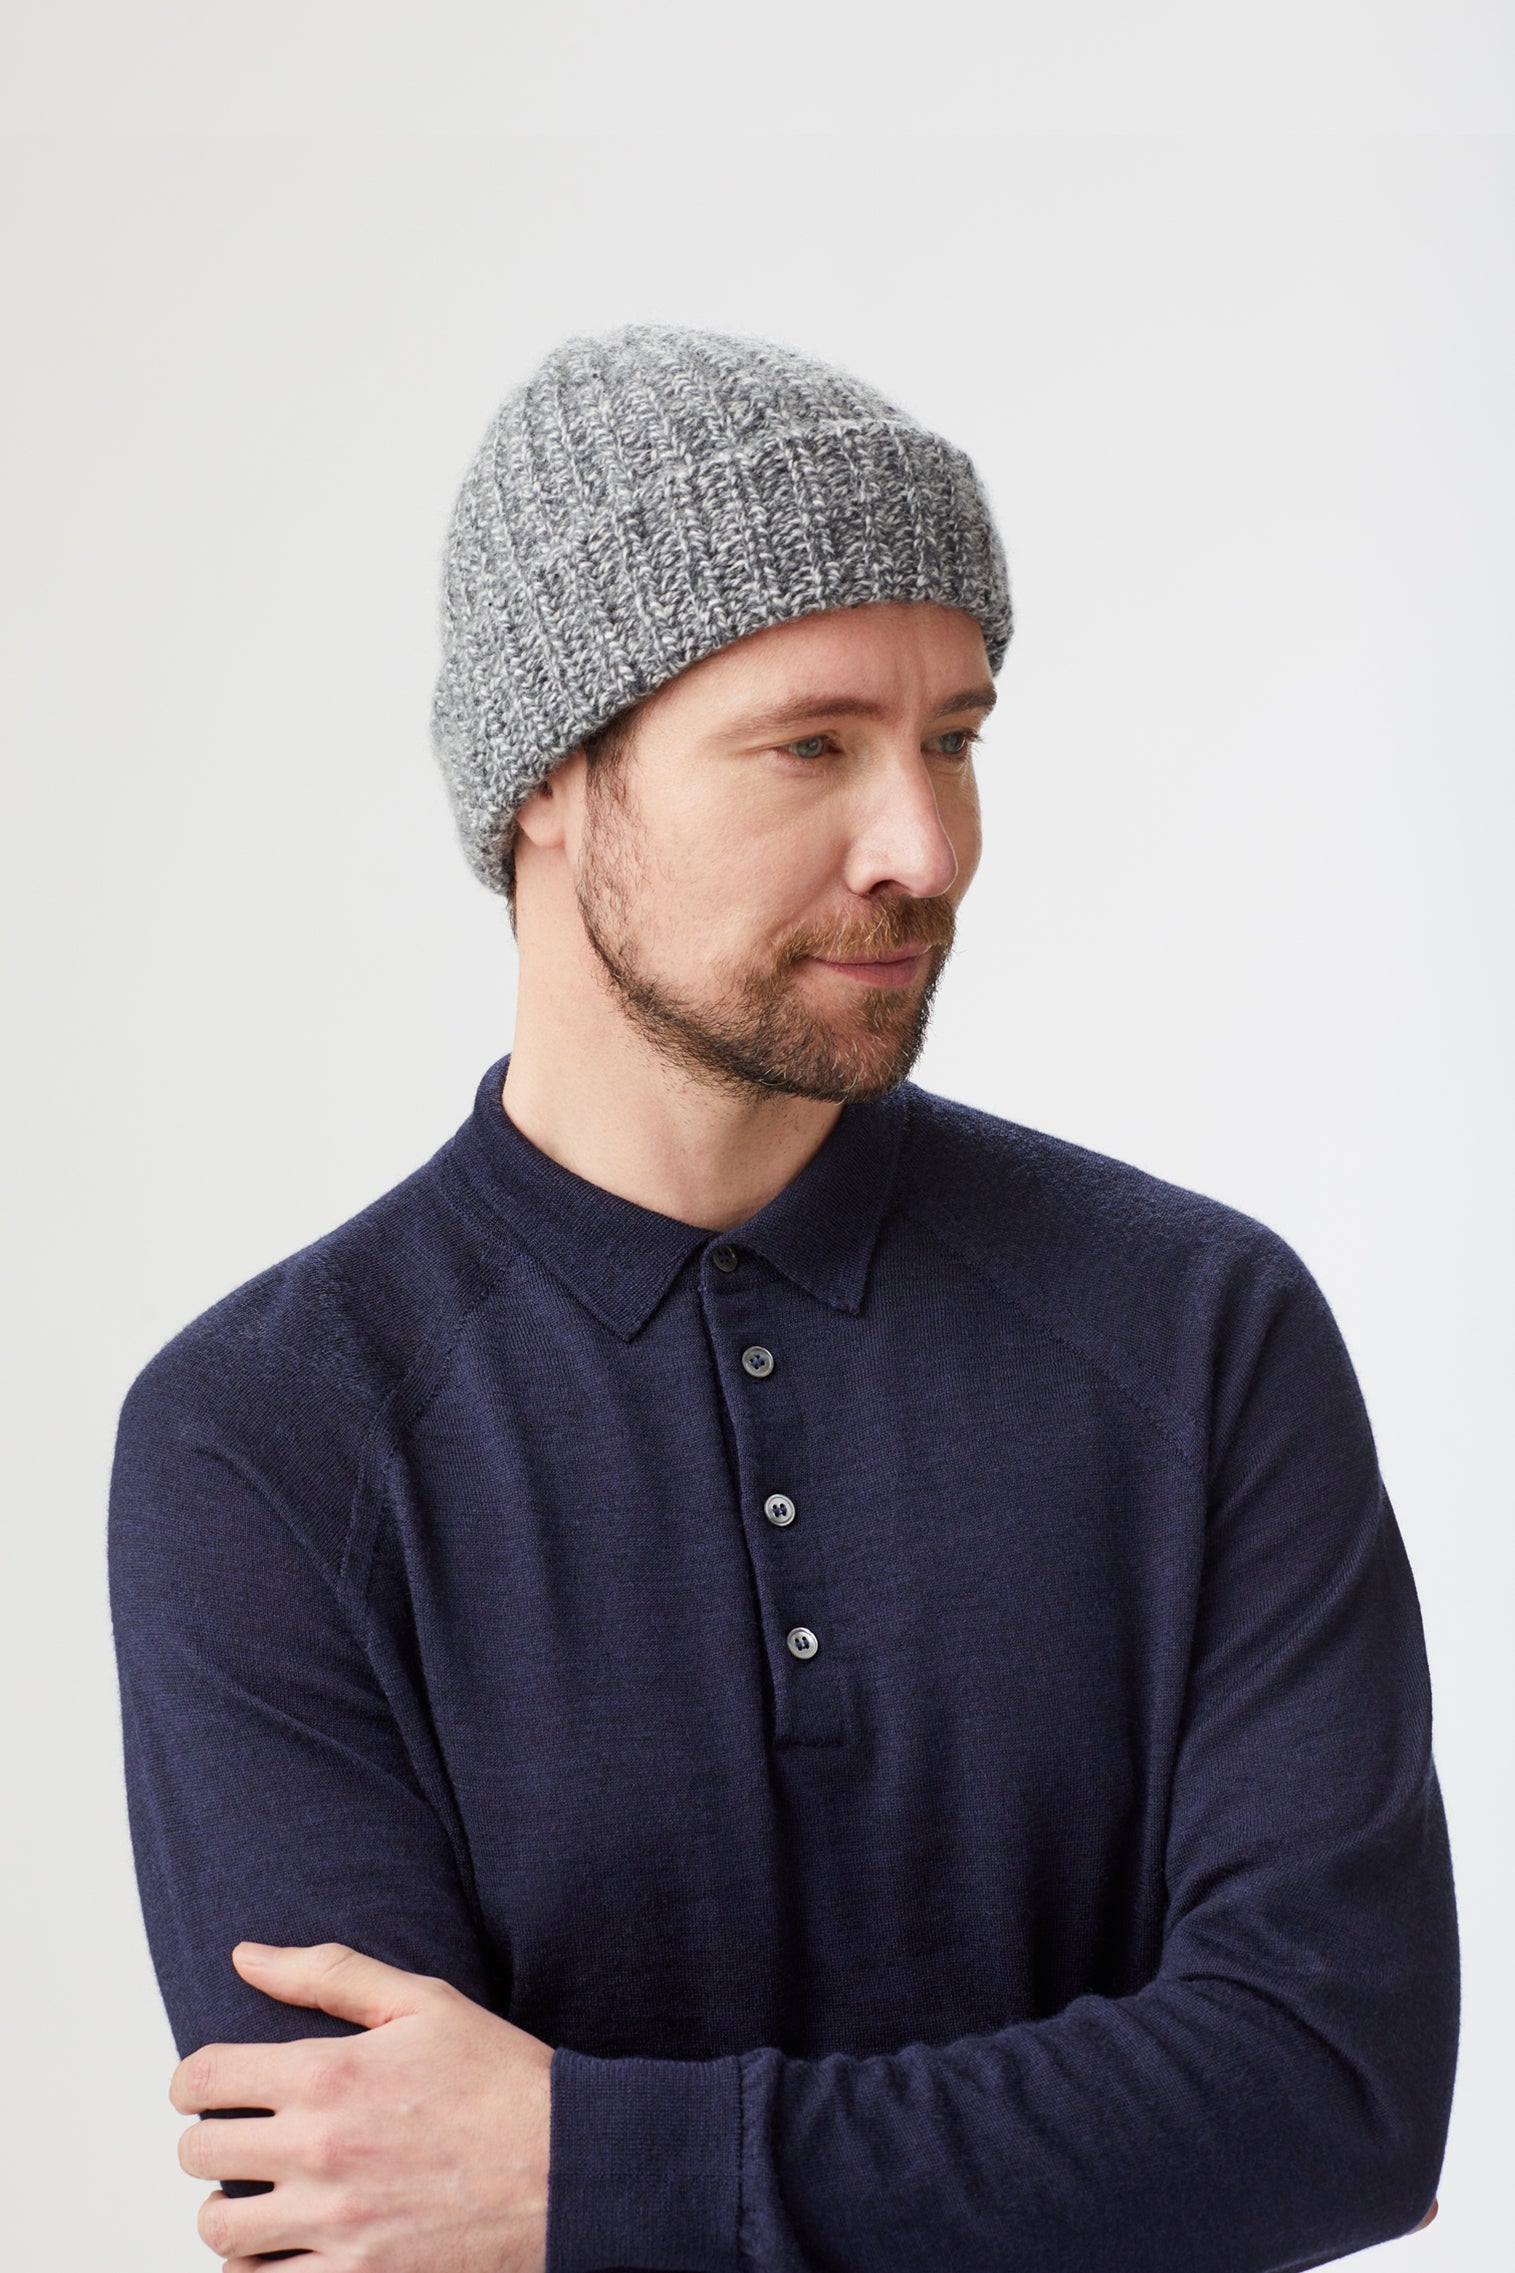 Lock x Joe Watchman Cashmere Beanie - Hats for Round Face Shapes - Lock & Co. Hatters London UK